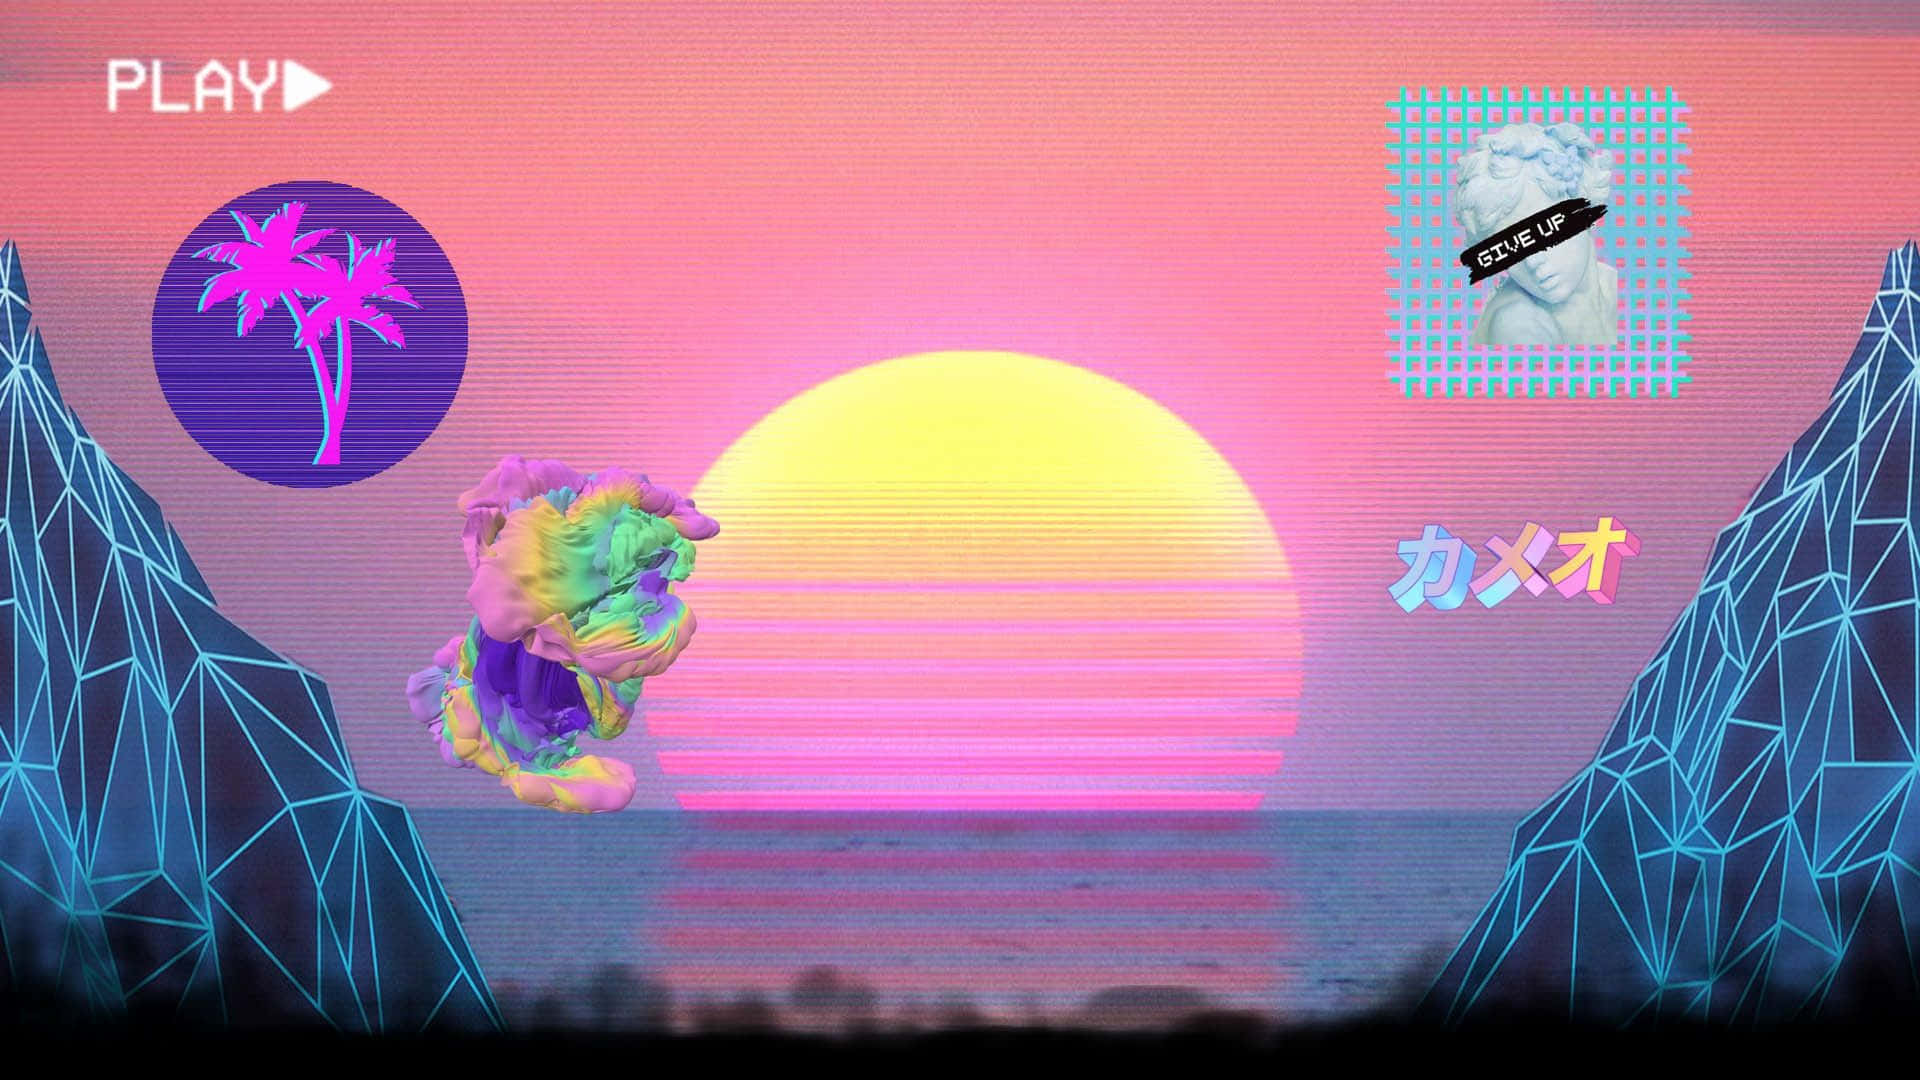 Feel the nostalgia with this vibrant Synthwave background